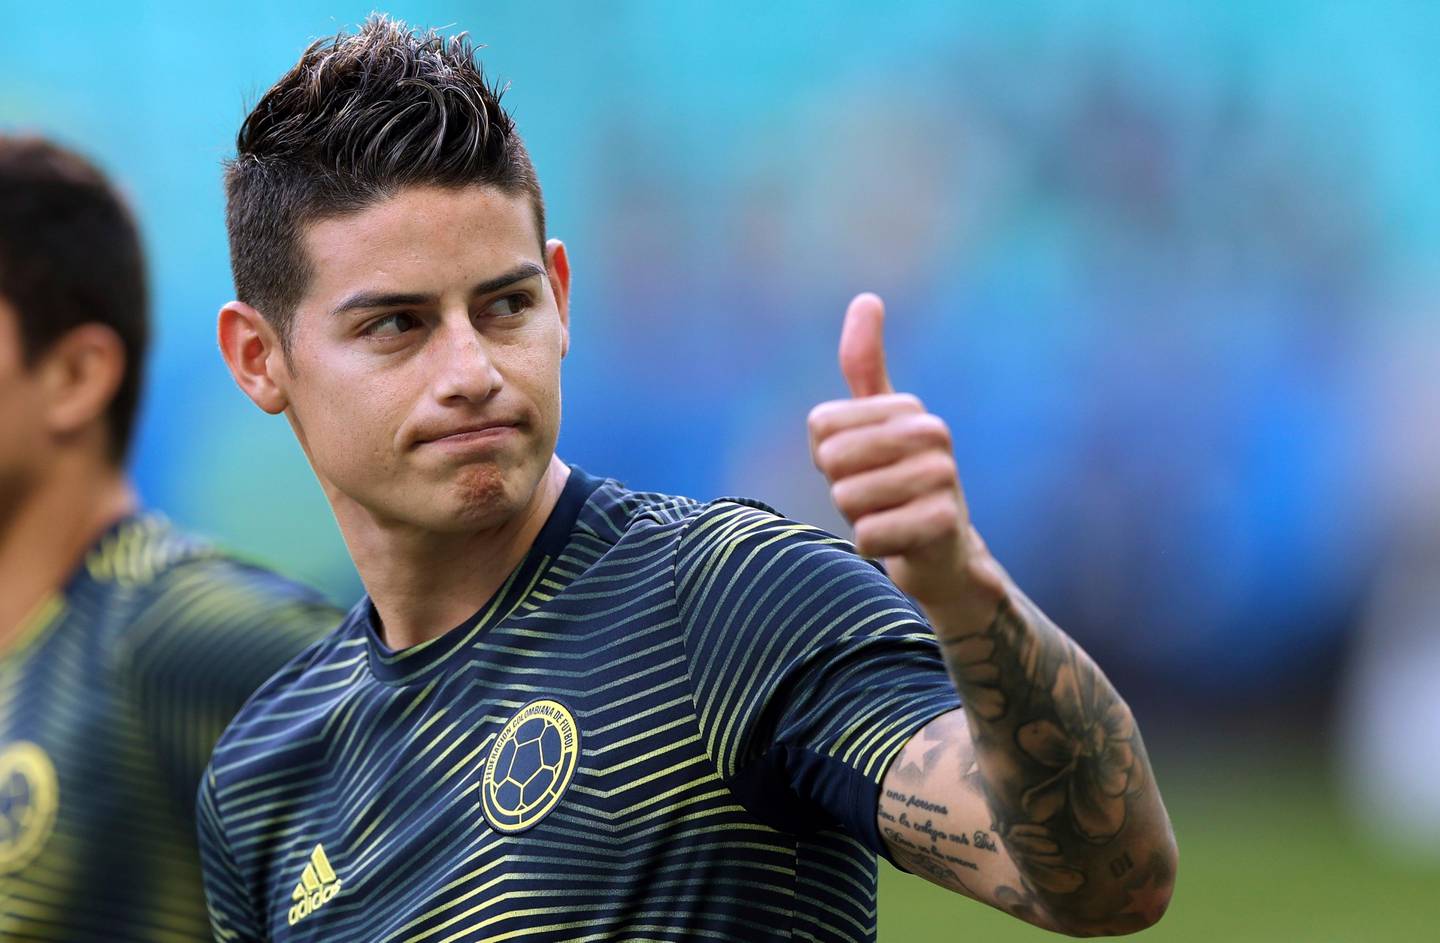 FILE - In this Sunday, June 23, 2019 file photo, Colombia's James Rodriguez gives a thumbs up before a Copa America Group B soccer match against Paraguay at Arena Fonte Nova in Salvador, Brazil. James Rodriguez joined Premier League club Everton on Monday, Sept. 7, 2020 in an attempt to revive a career that faltered at Real Madrid. Signed by the Spanish giants after capturing world football with a stunning goal for Colombia at the 2014 World Cup, Rodriguez couldnt match those highs in Madrid. (AP Photo/Ricardo Mazalan, file)